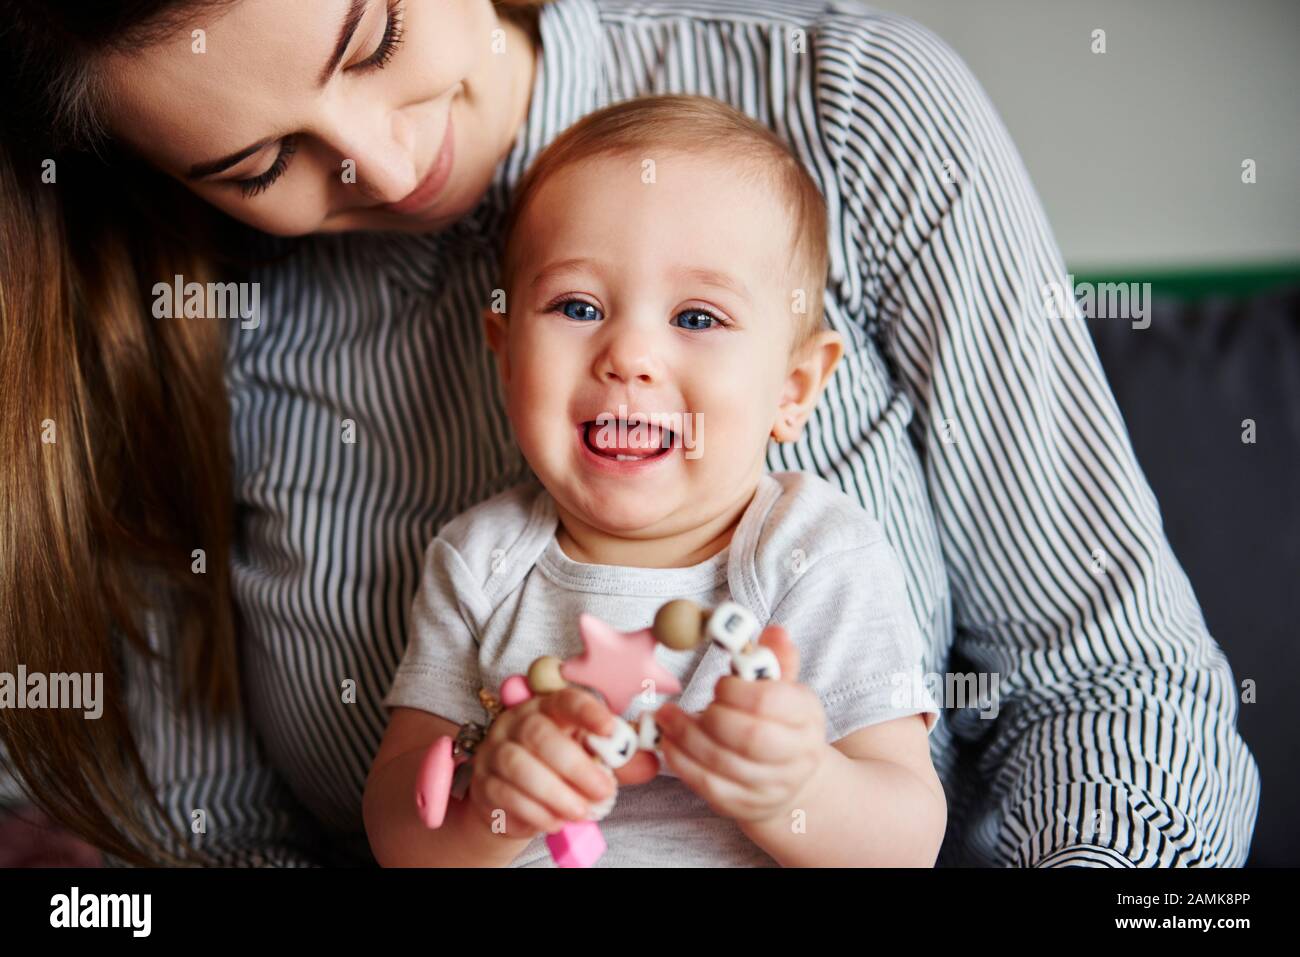 Affectionate mother embracing her little daughter Stock Photo